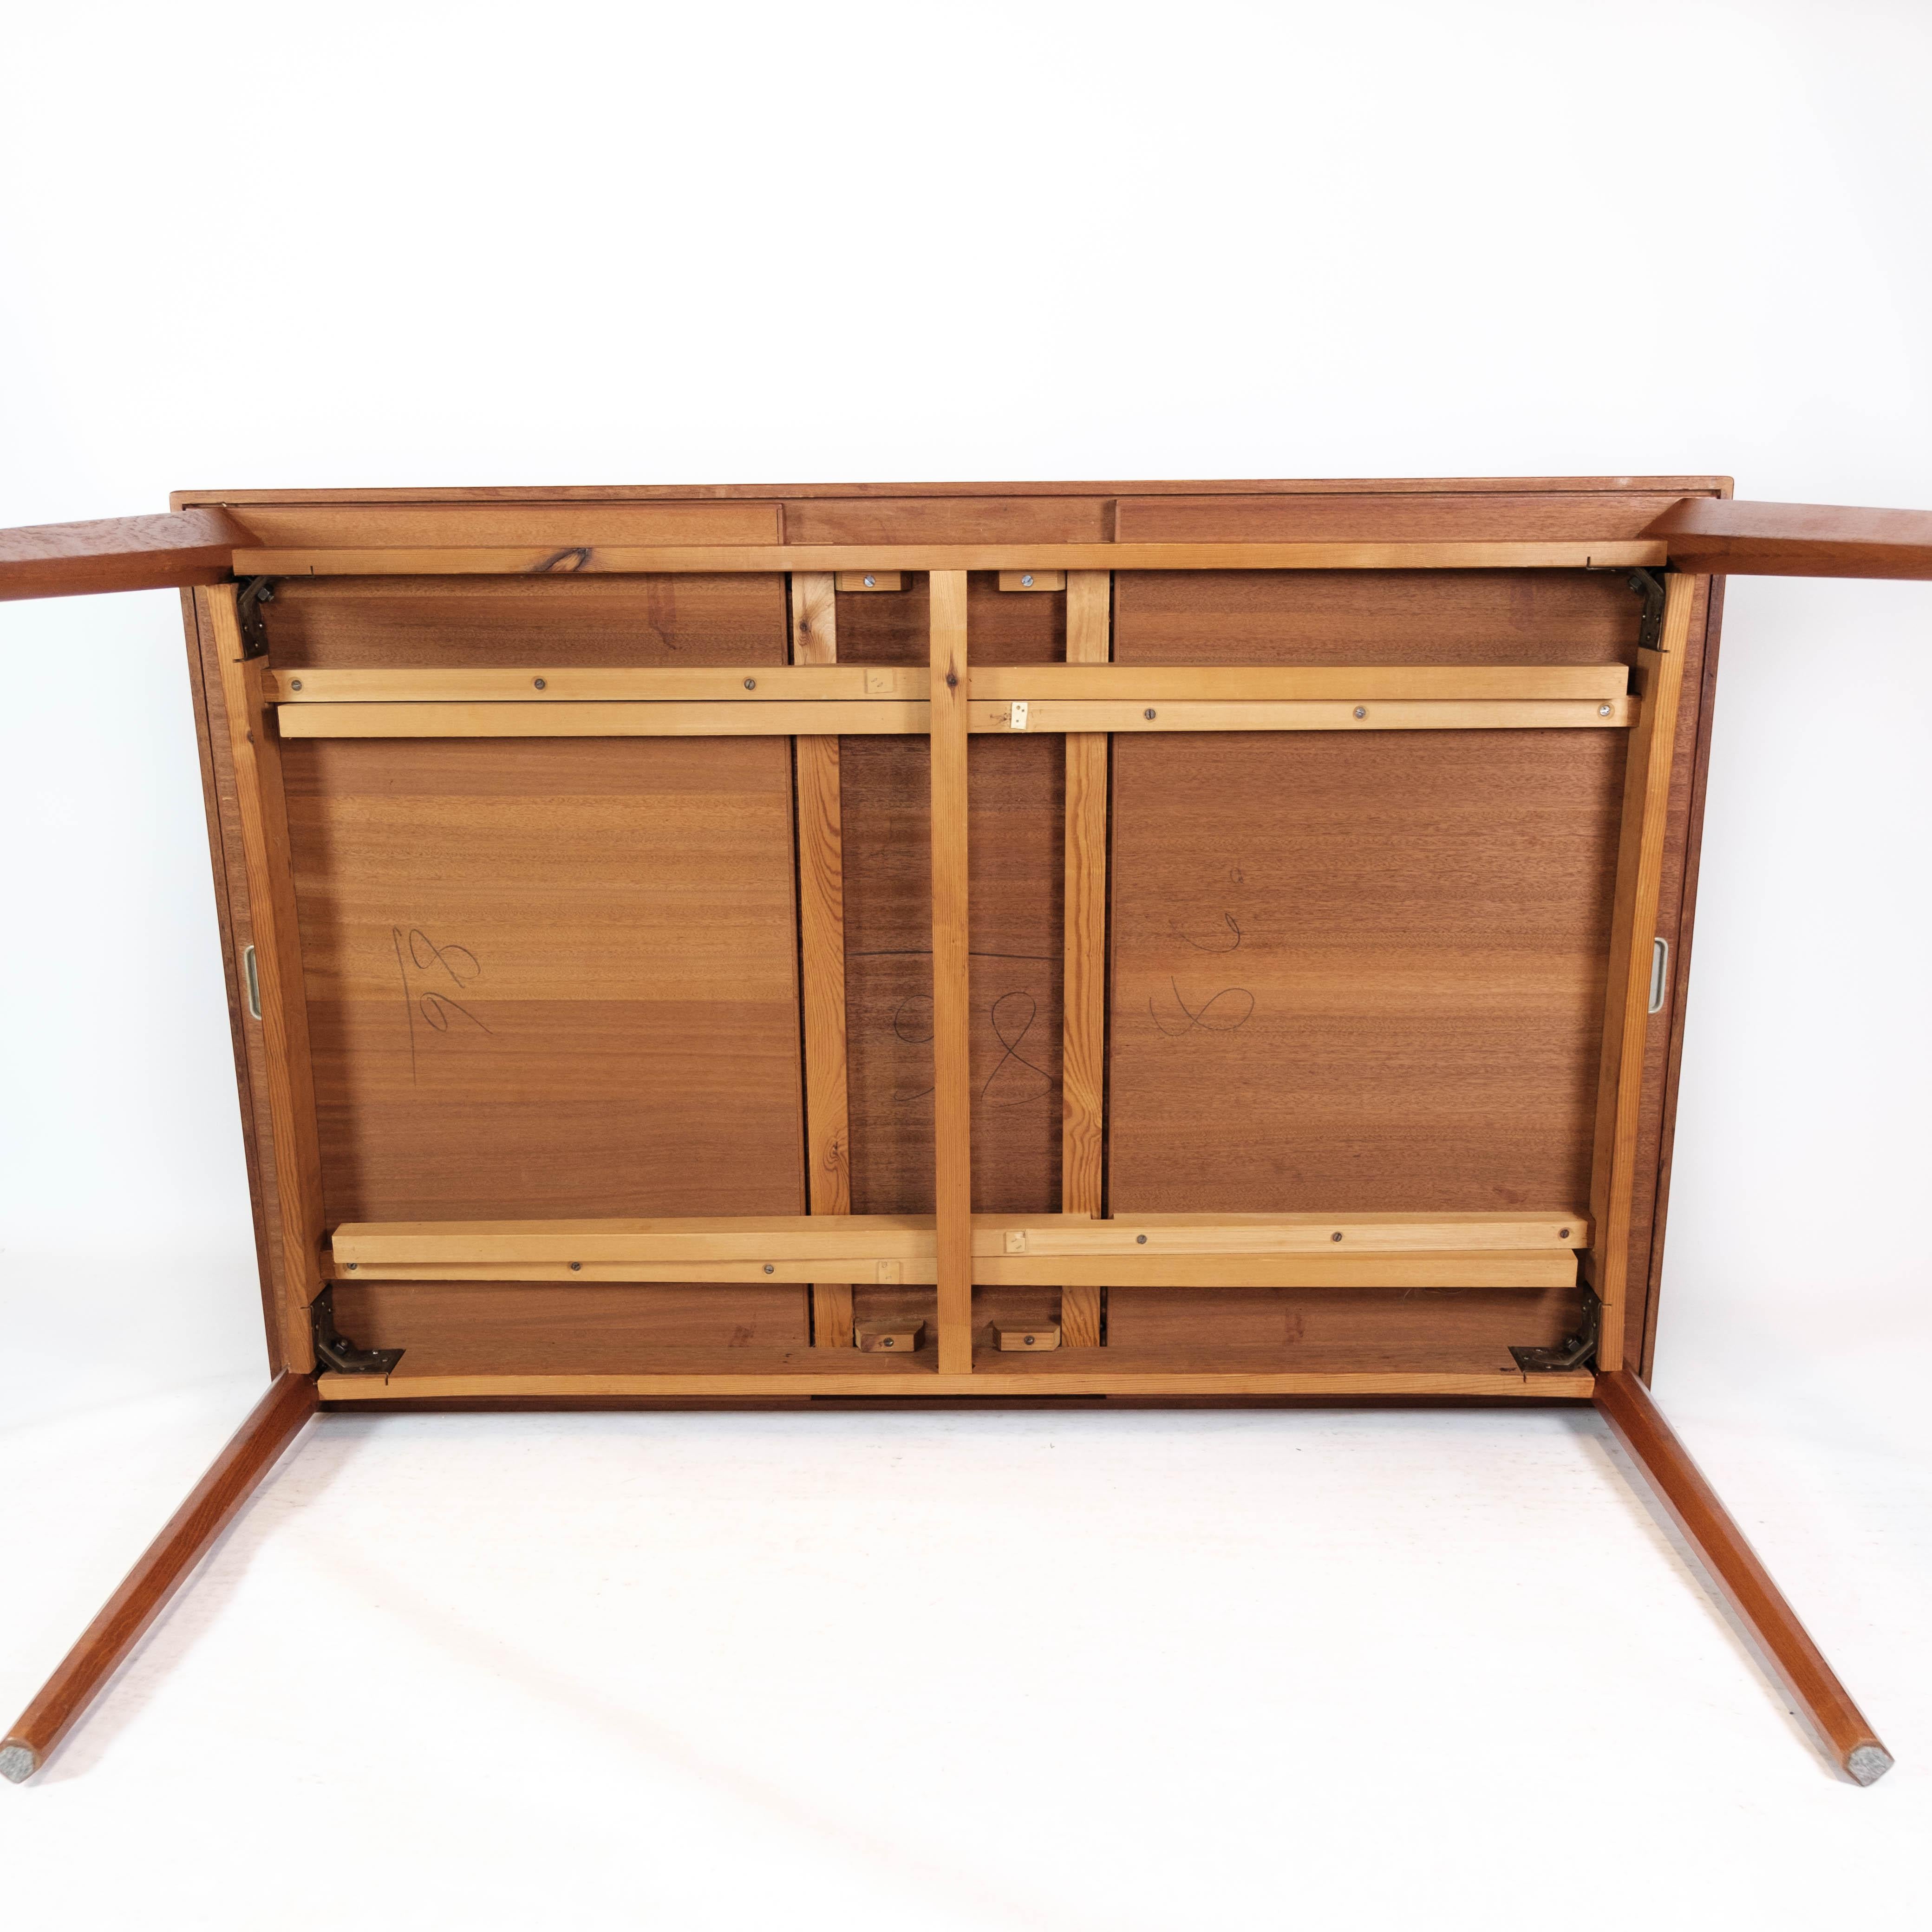 Dining Table in Teak with Extension Plates, of Danish Design from the 1960s For Sale 8